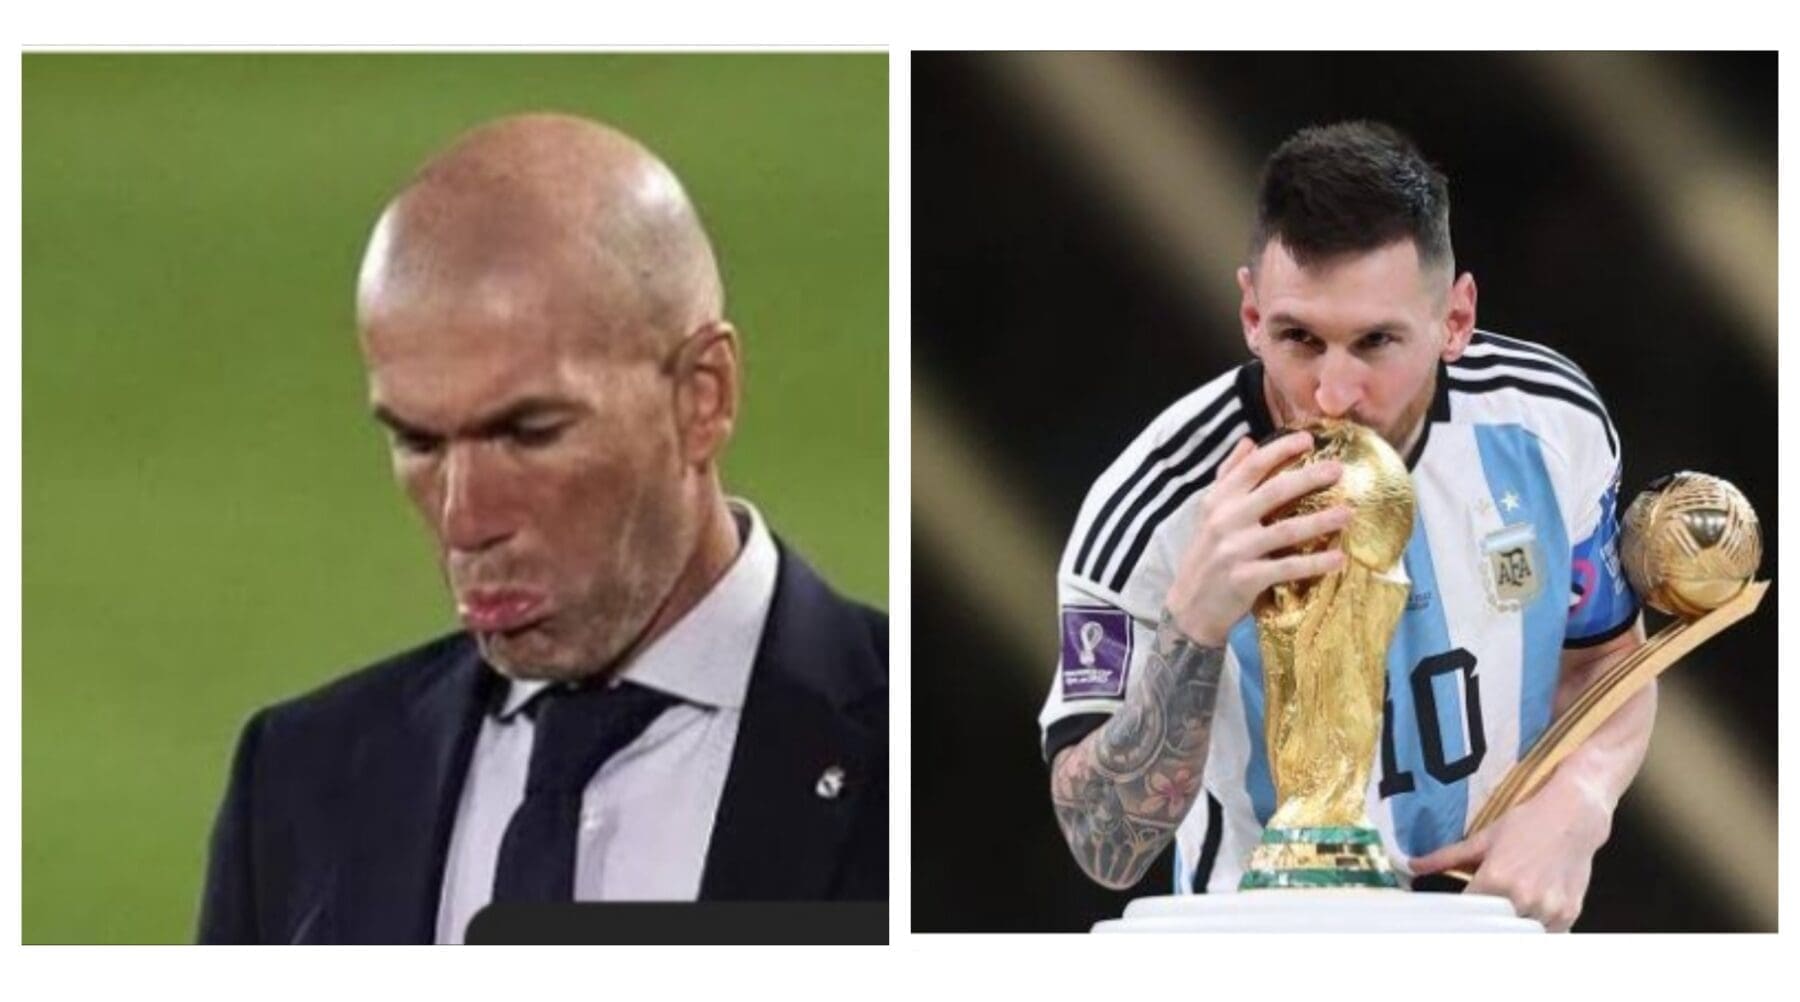 A picture of the stars Lionel Messi and Zidane